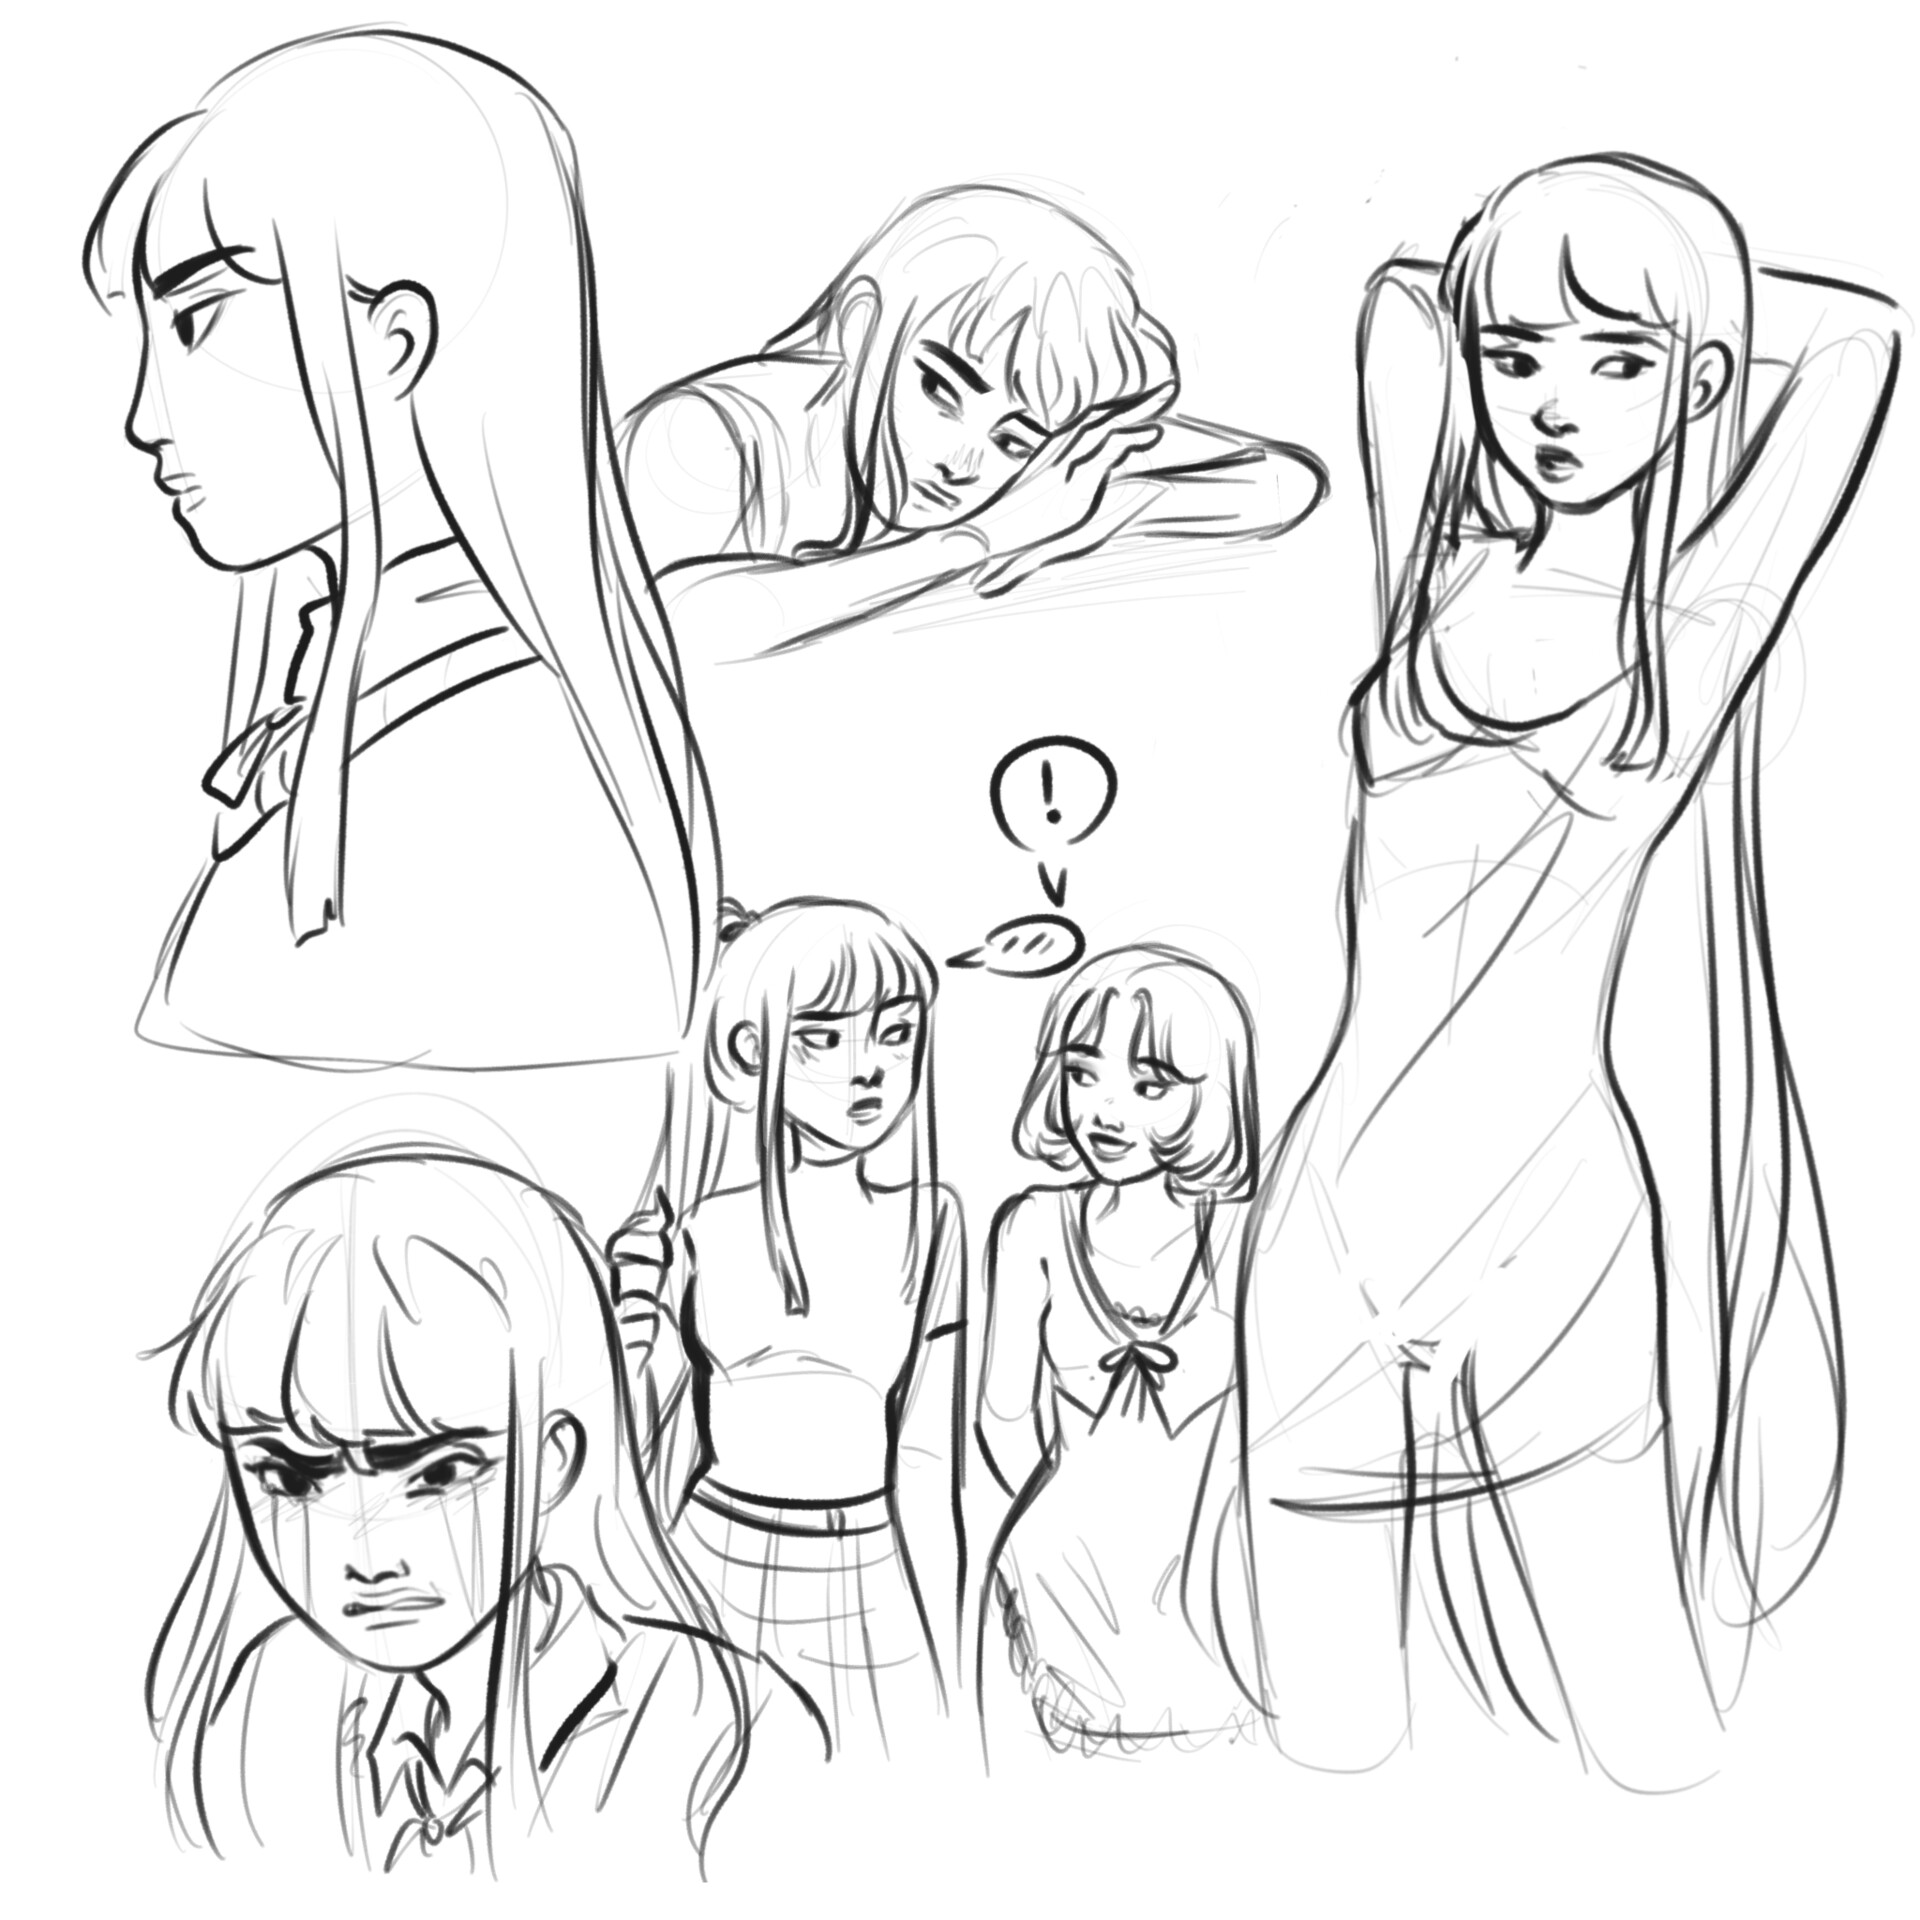 ArtStation - Sketches and unfinished comic